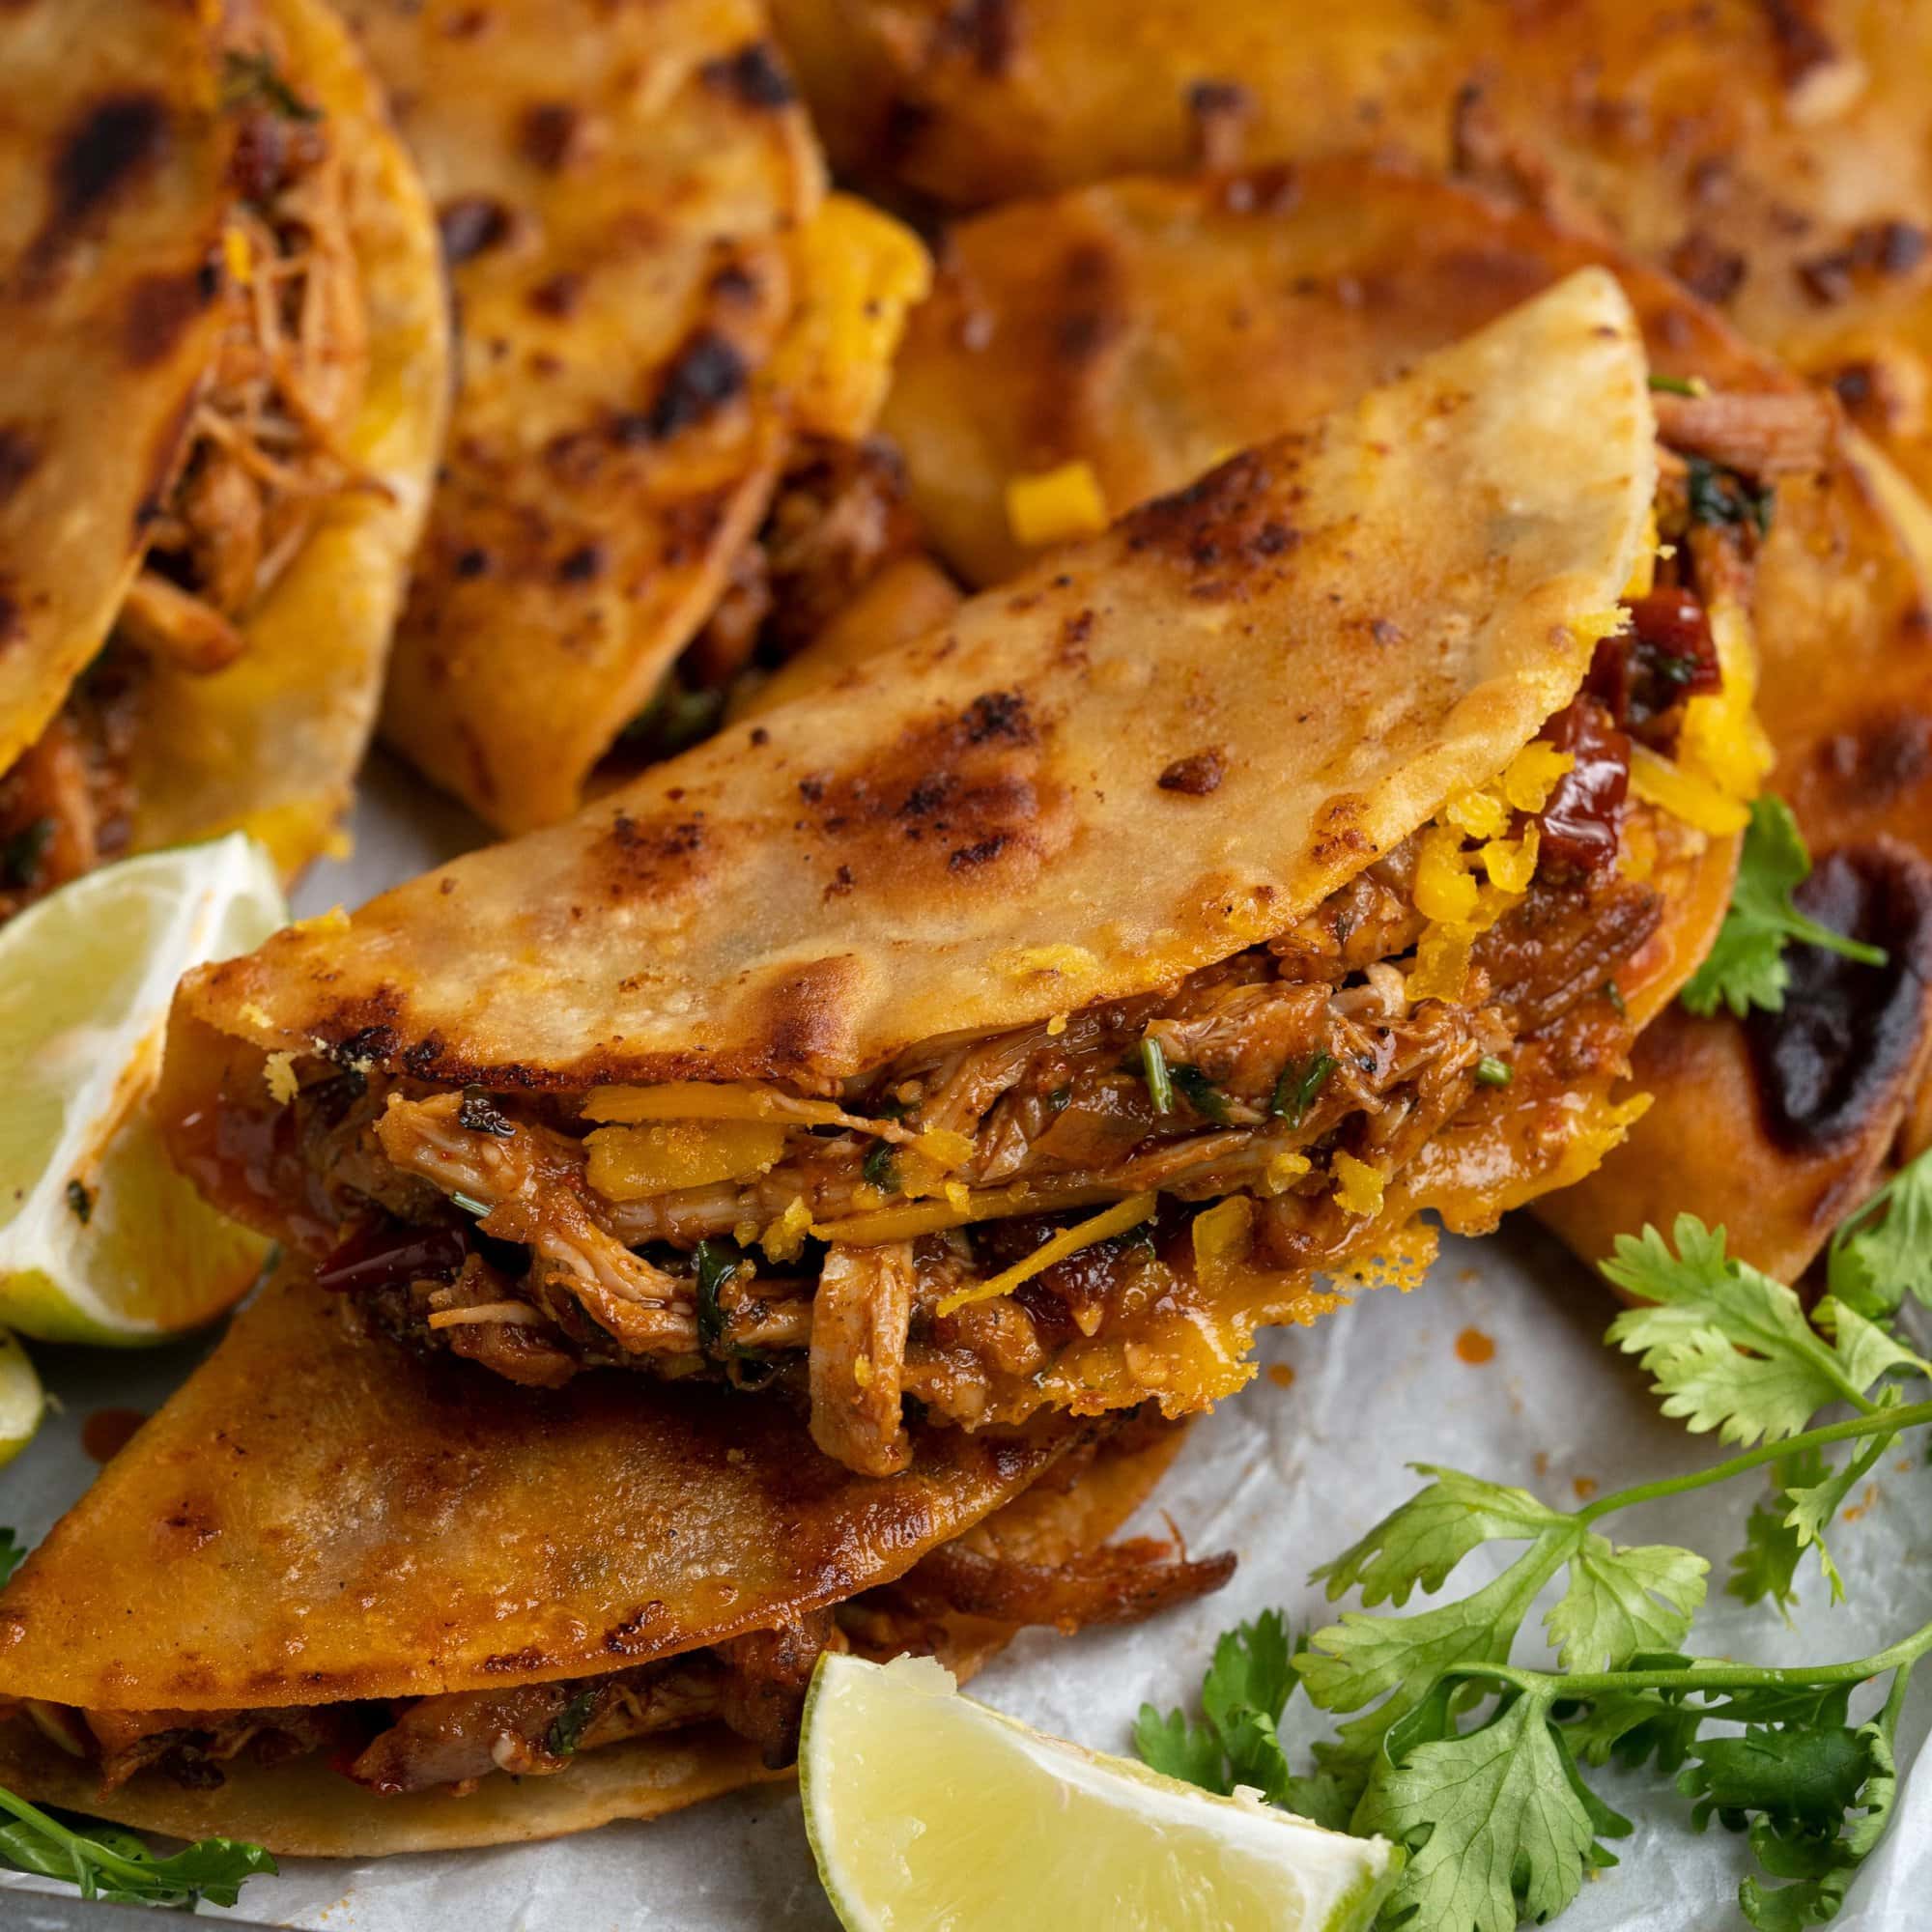 Close up of Chicken Tacos - crispy pan fried tortillas filled with juicy shredded chicken thighs and Mexican cheese.